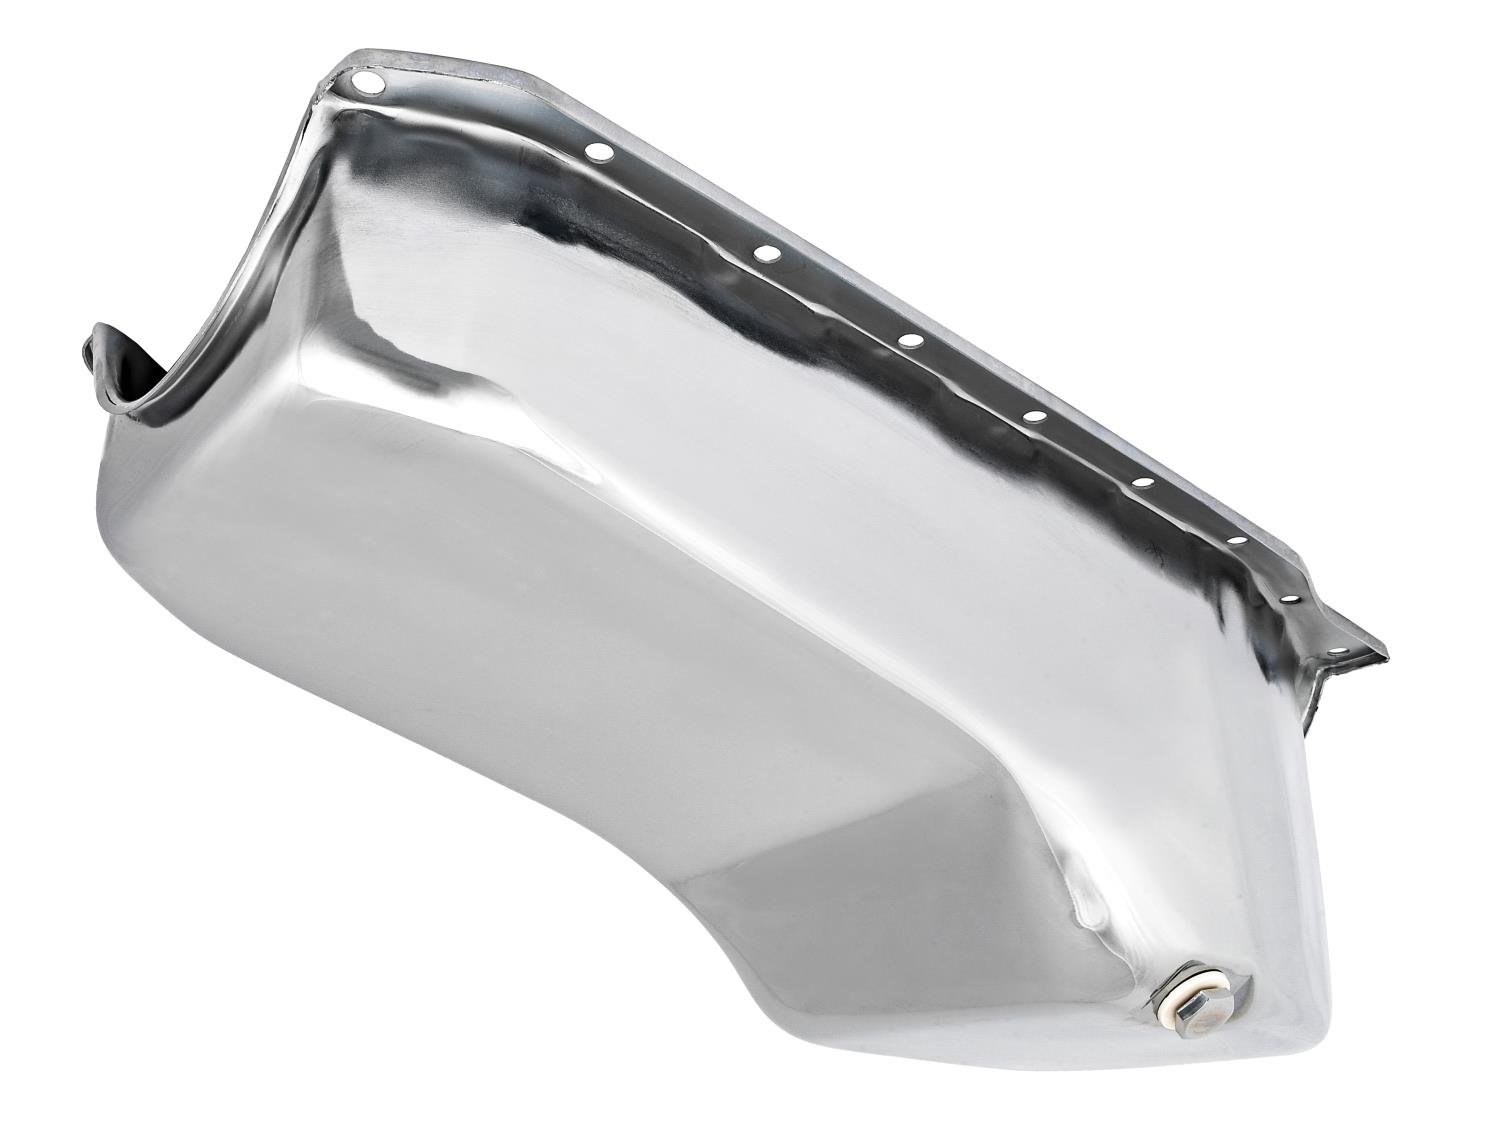 Stock-Style Replacement Oil Pan for 1986-2002 Small Block Chevy [Right/Passenger Side Dip Stick, Chrome]